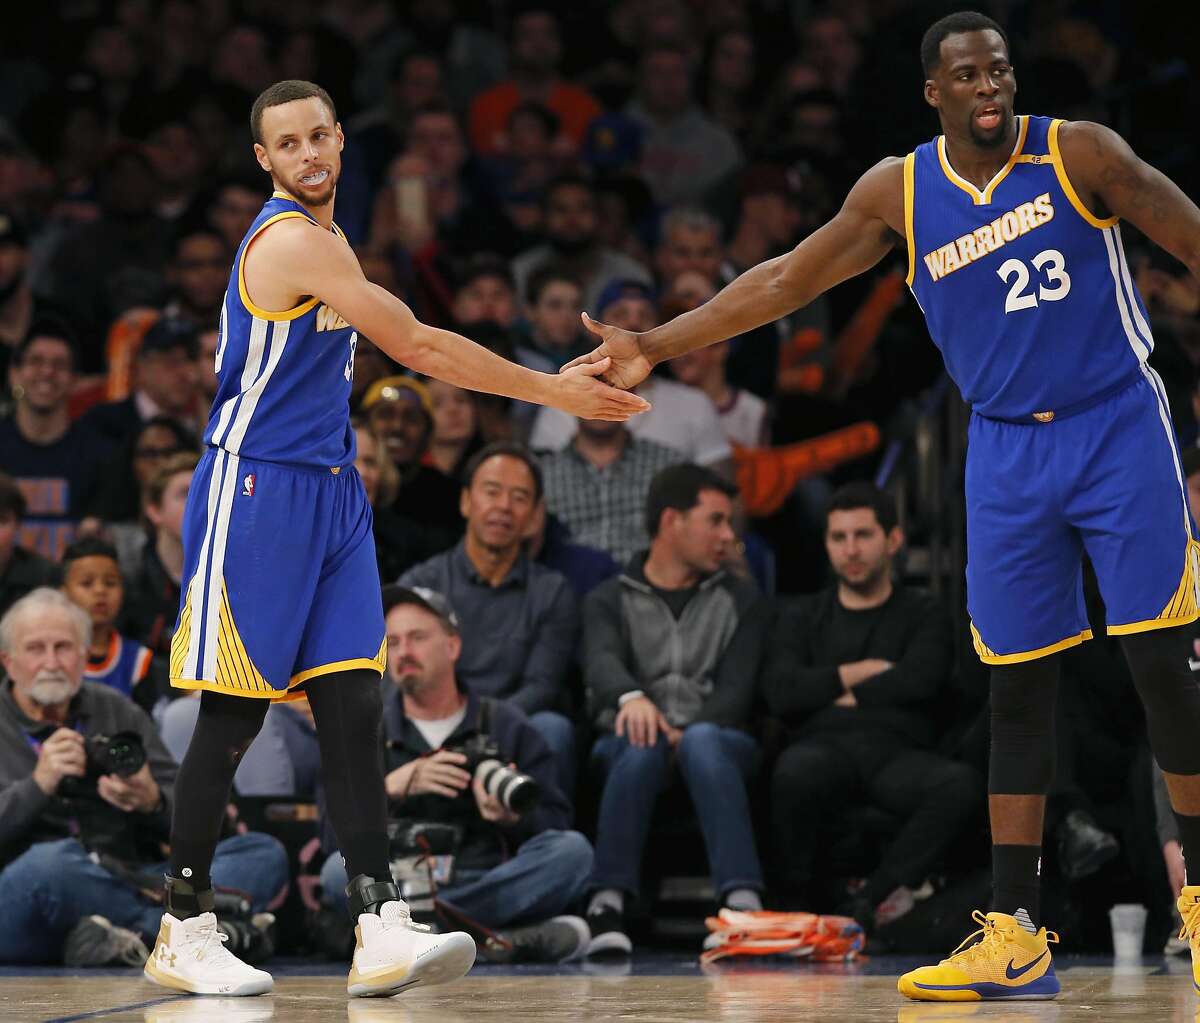 Golden State Warriors guard Stephen Curry (30) and Warriors forward Draymond Green (23) slap hands in the second half of an NBA basketball game against the New York Knicks at Madison Square Garden in New York, Sunday, March 5, 2017. The Warriors defeated the Knicks 112-105. (AP Photo/Kathy Willens)